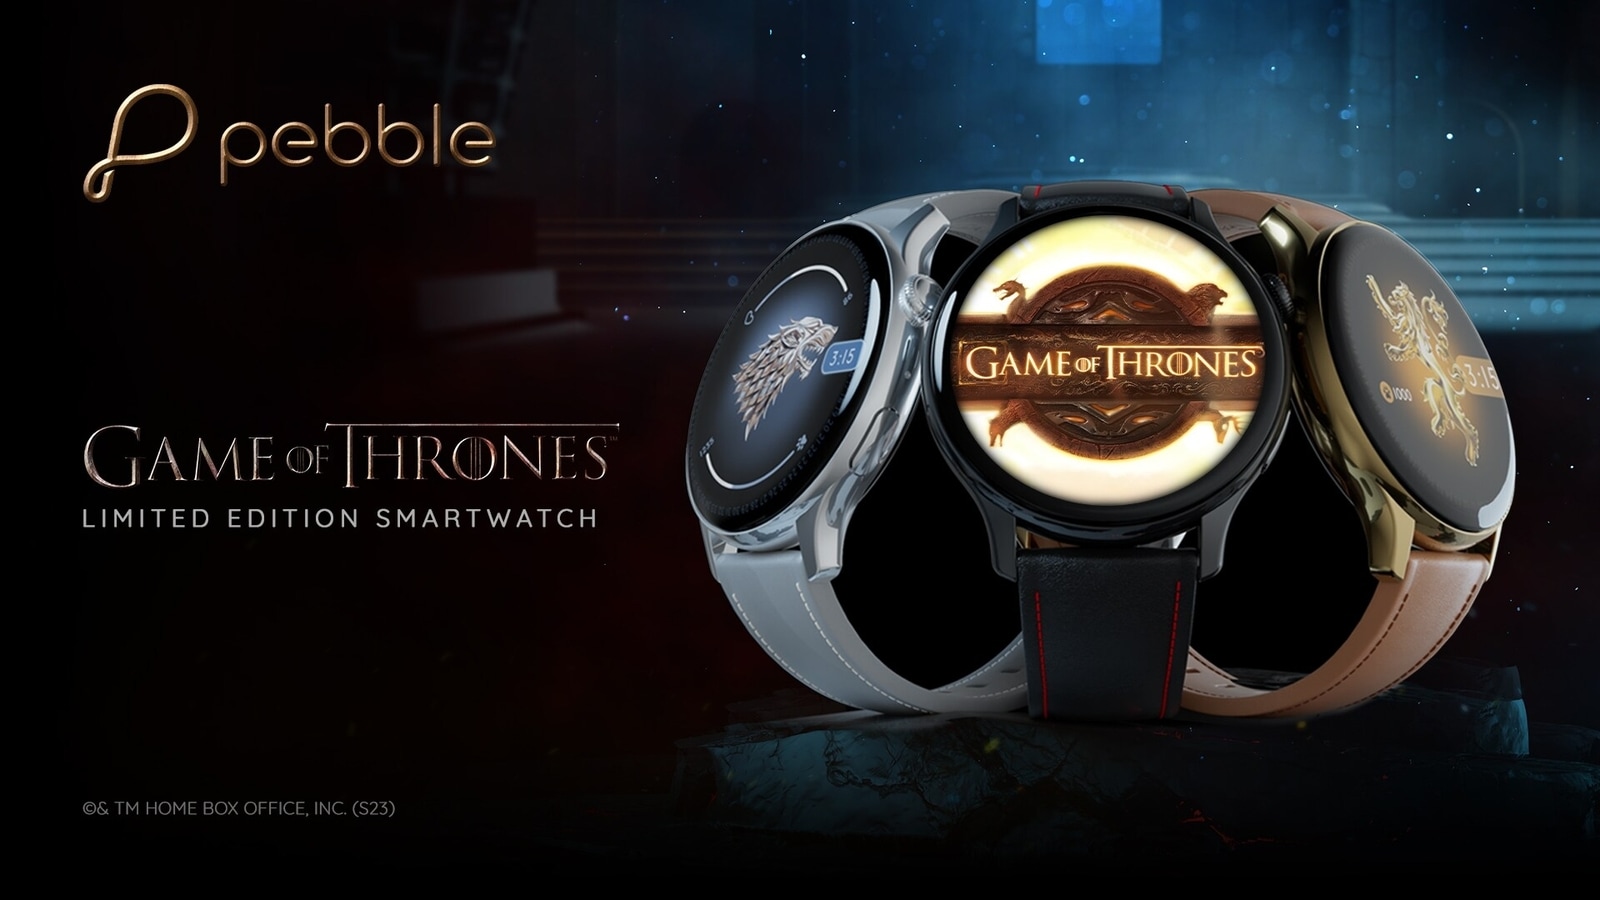 Pebble Game of Thrones special edition smartwatch launched; Check price, features, and collectibles